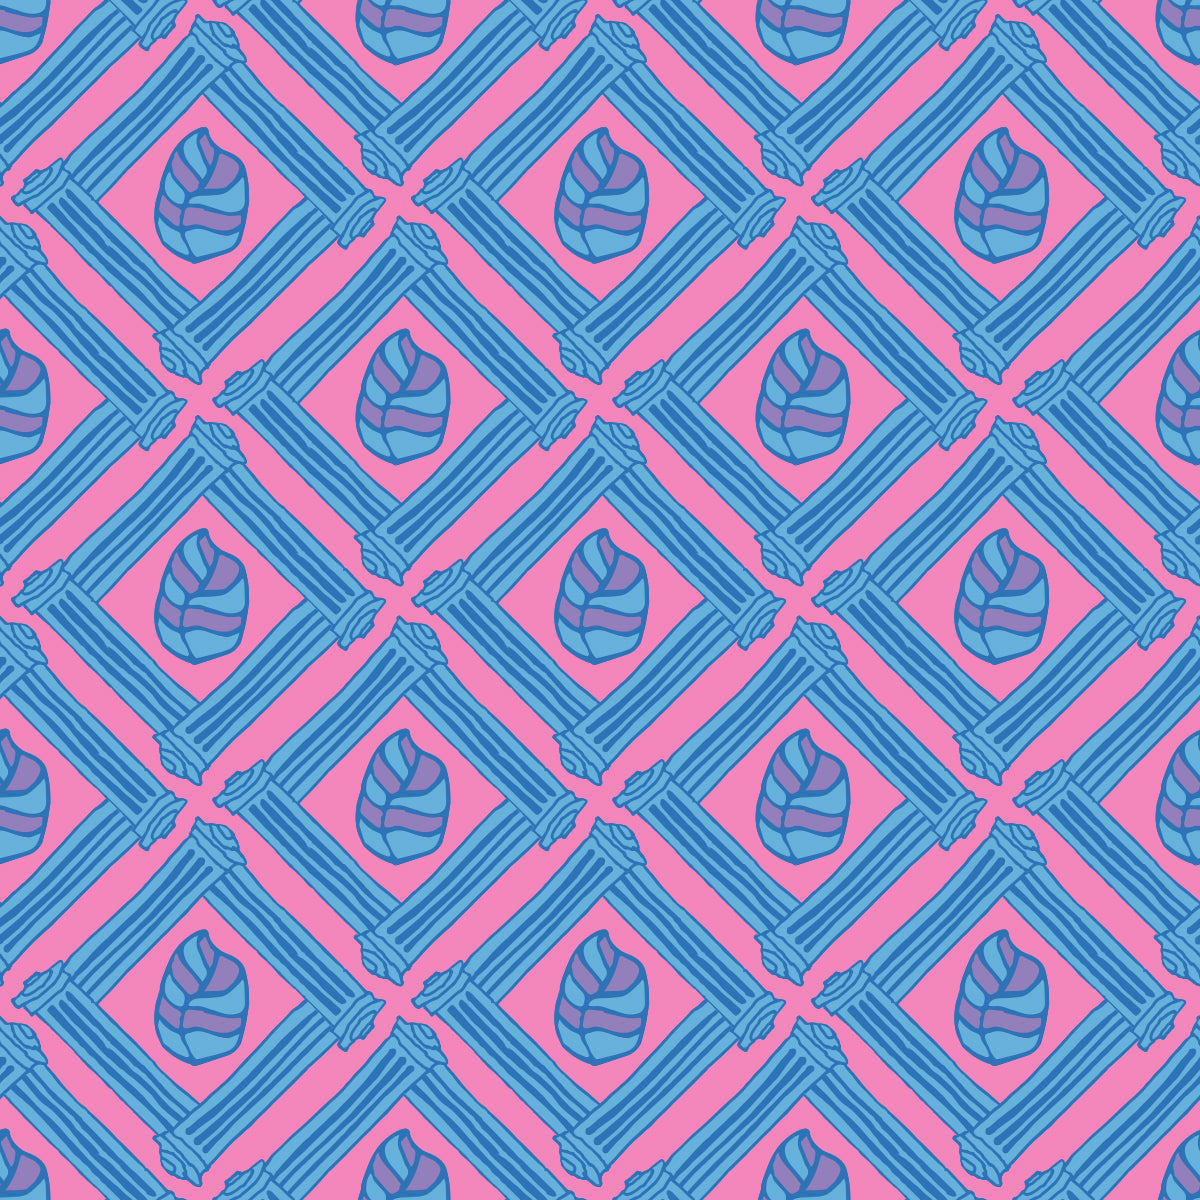 Beach Fence Pink & Blue features a repeating pattern in pink and blue of striped leaves encased in diamond shapes made out of organic hand-drawn lines.